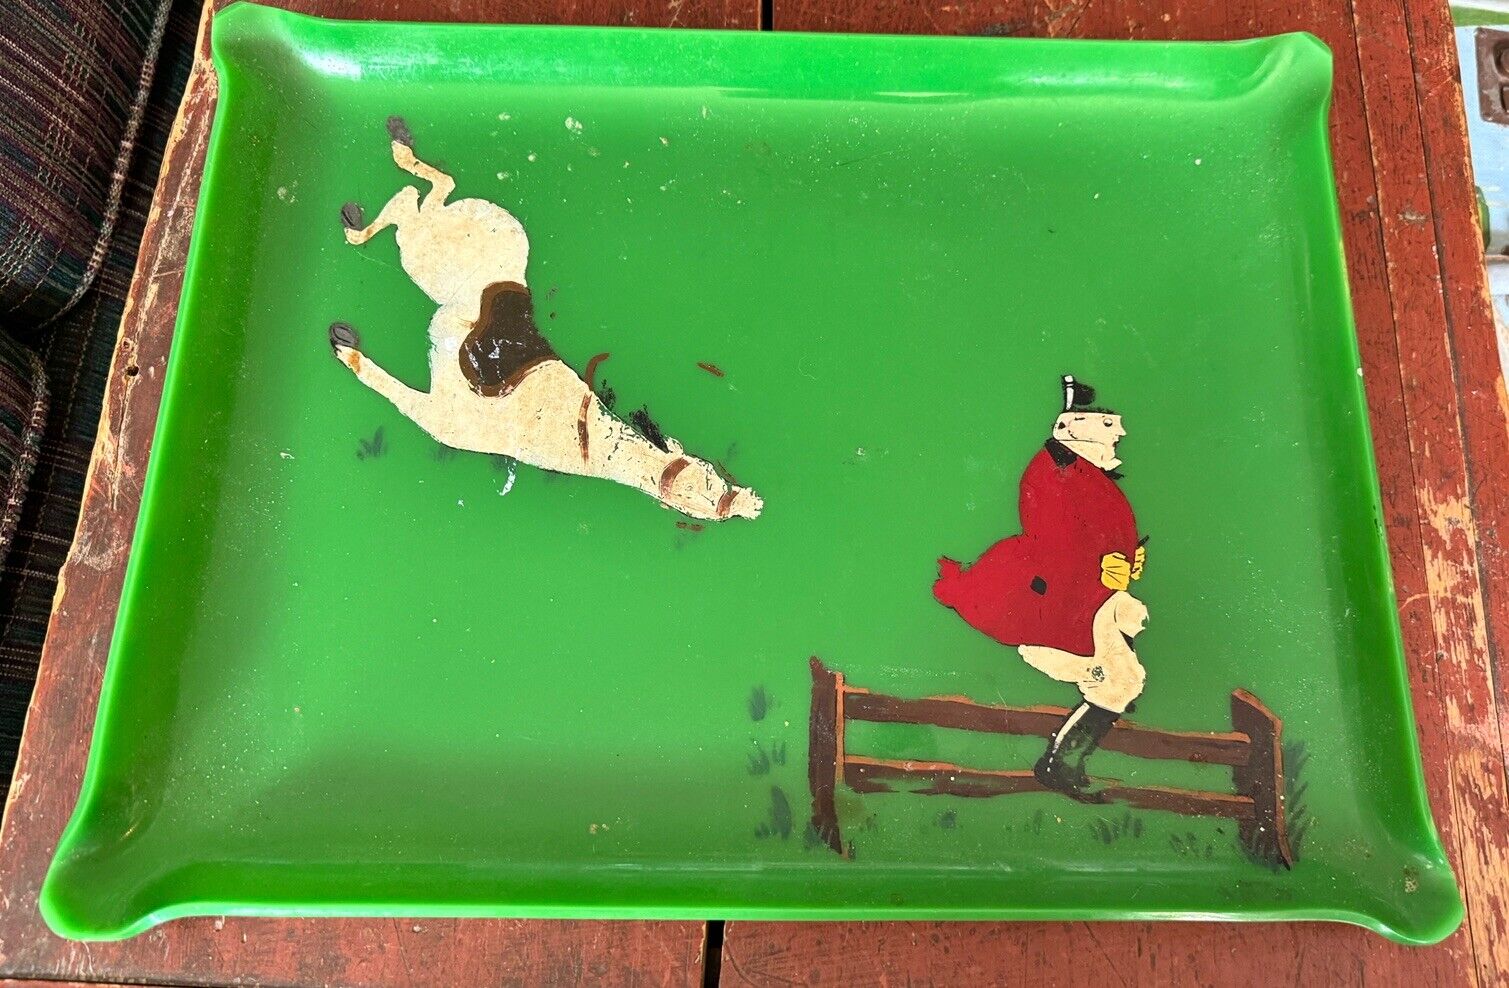 Vintage 1930/40s Green Bakelite Serving Tray w/ Horse/Rider Equestrian Painting